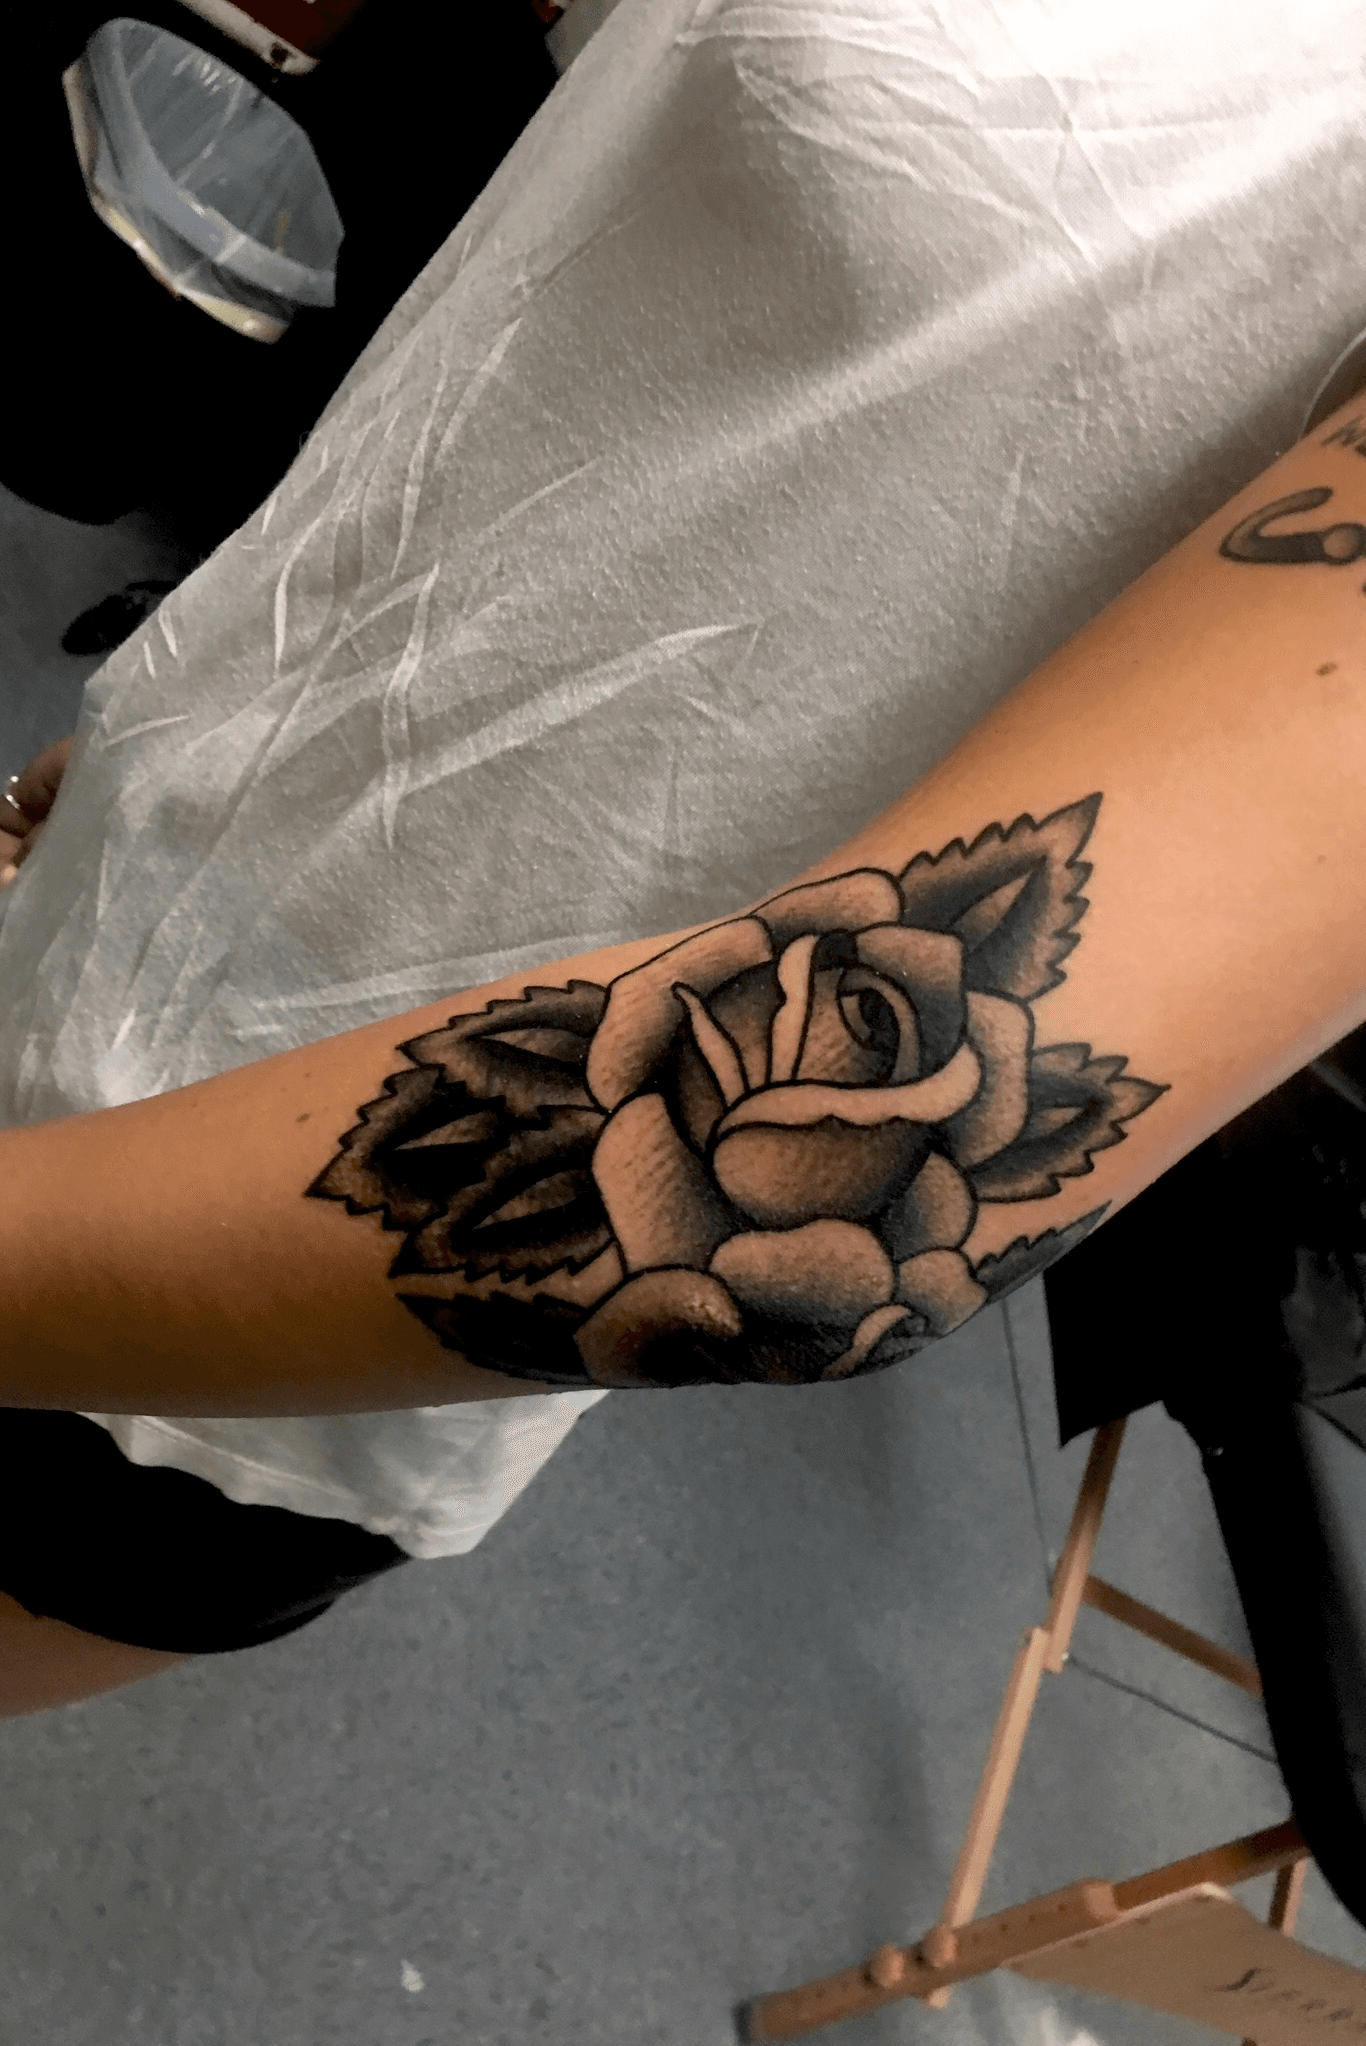 Traditional tattoo Tuesday Rose elbow tattoo by jimmyjohnsontattoo  tattootuesday southie boston bostontattooartist art  Instagram